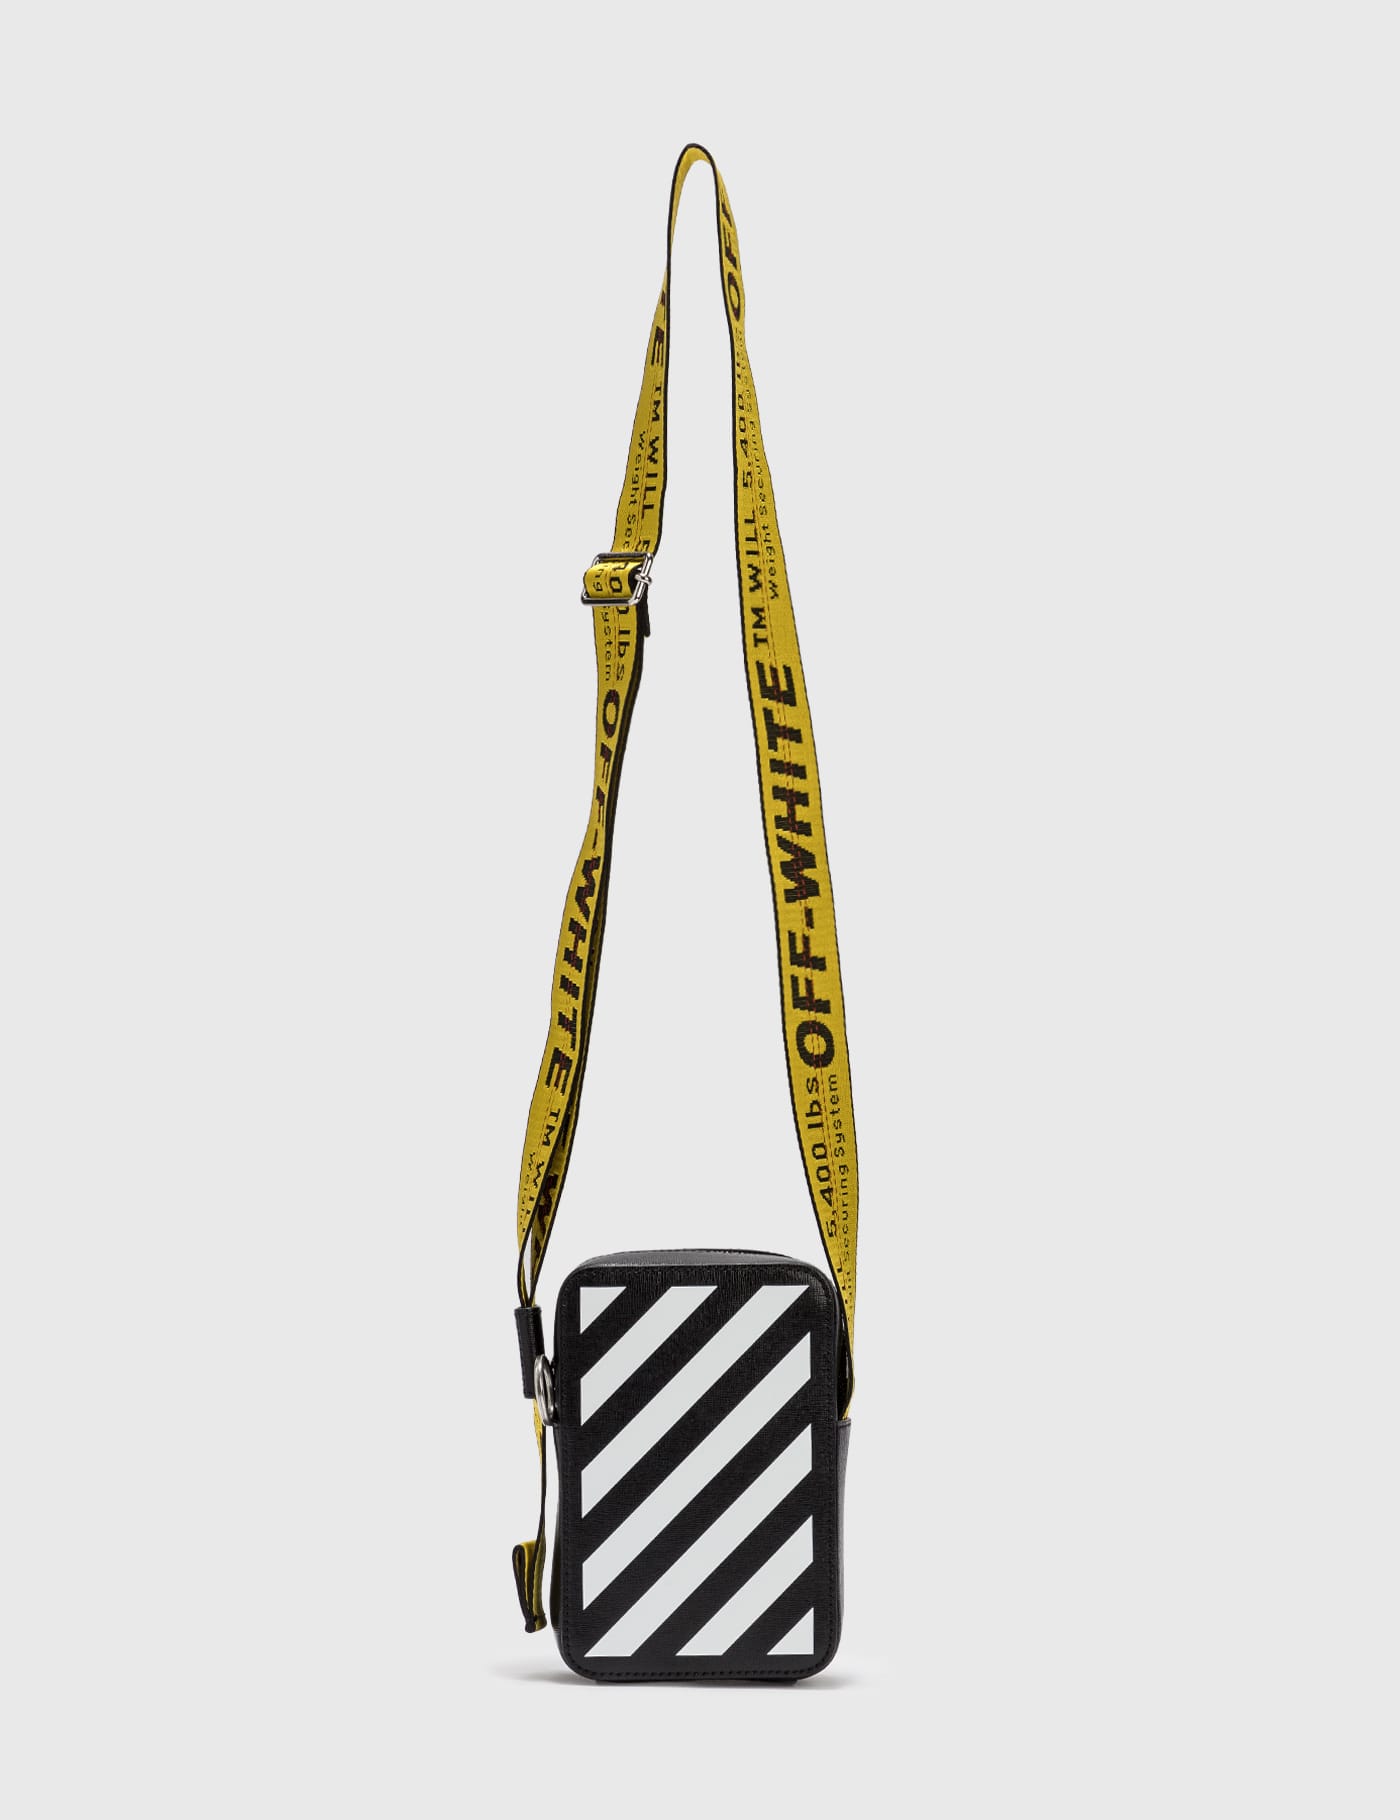 Off-White c/o Virgil Abloh Industrial Bag Strap - Black Bag Accessories,  Accessories - WOWVA20163 | The RealReal